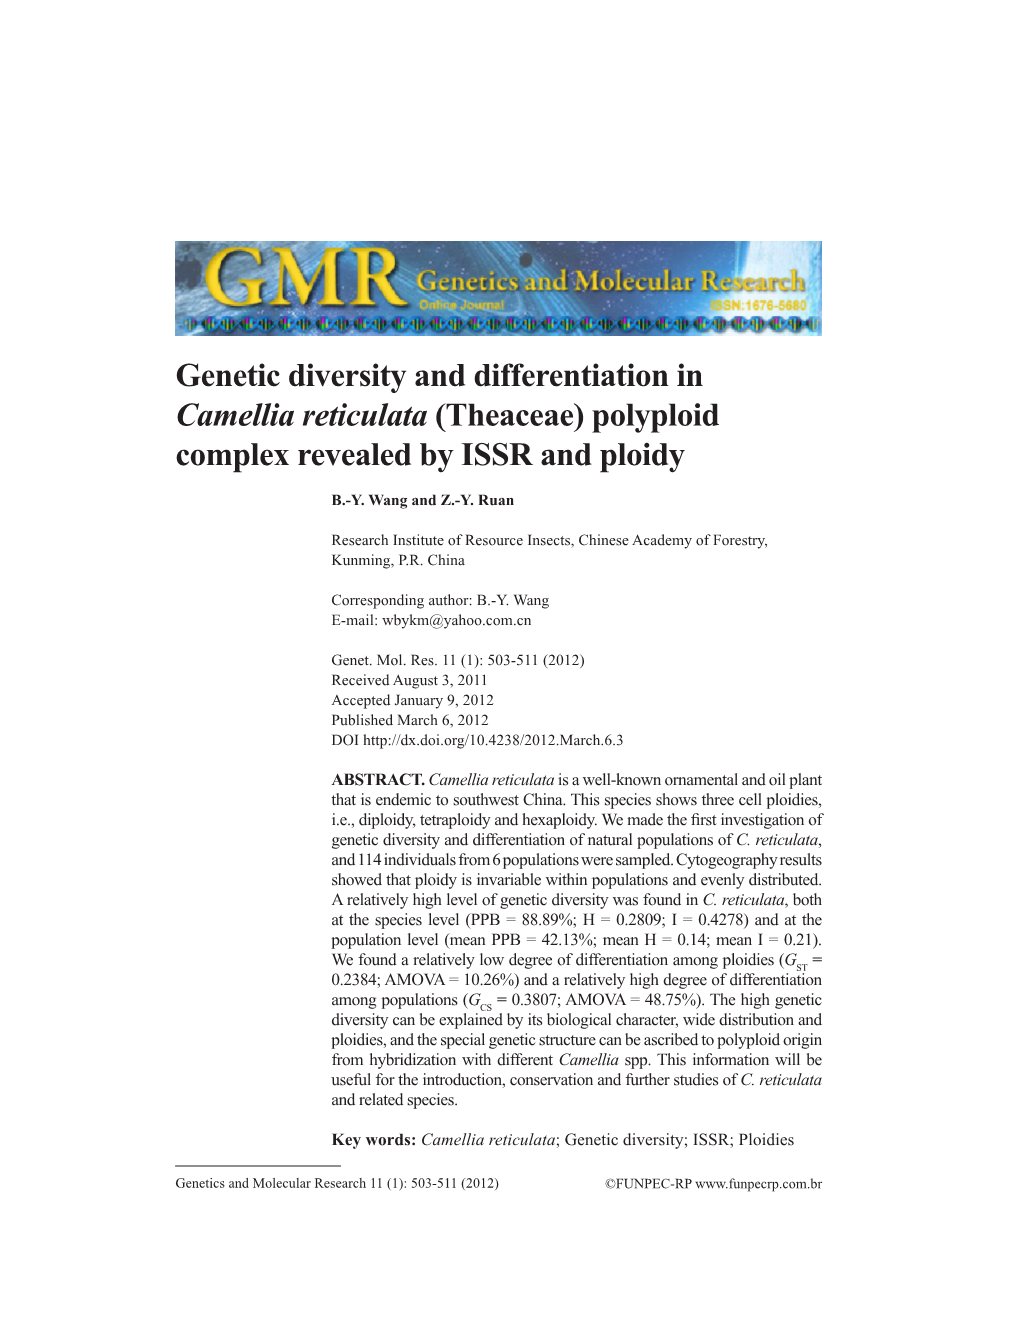 Genetic Diversity and Differentiation in Camellia Reticulata (Theaceae) Polyploid Complex Revealed by ISSR and Ploidy